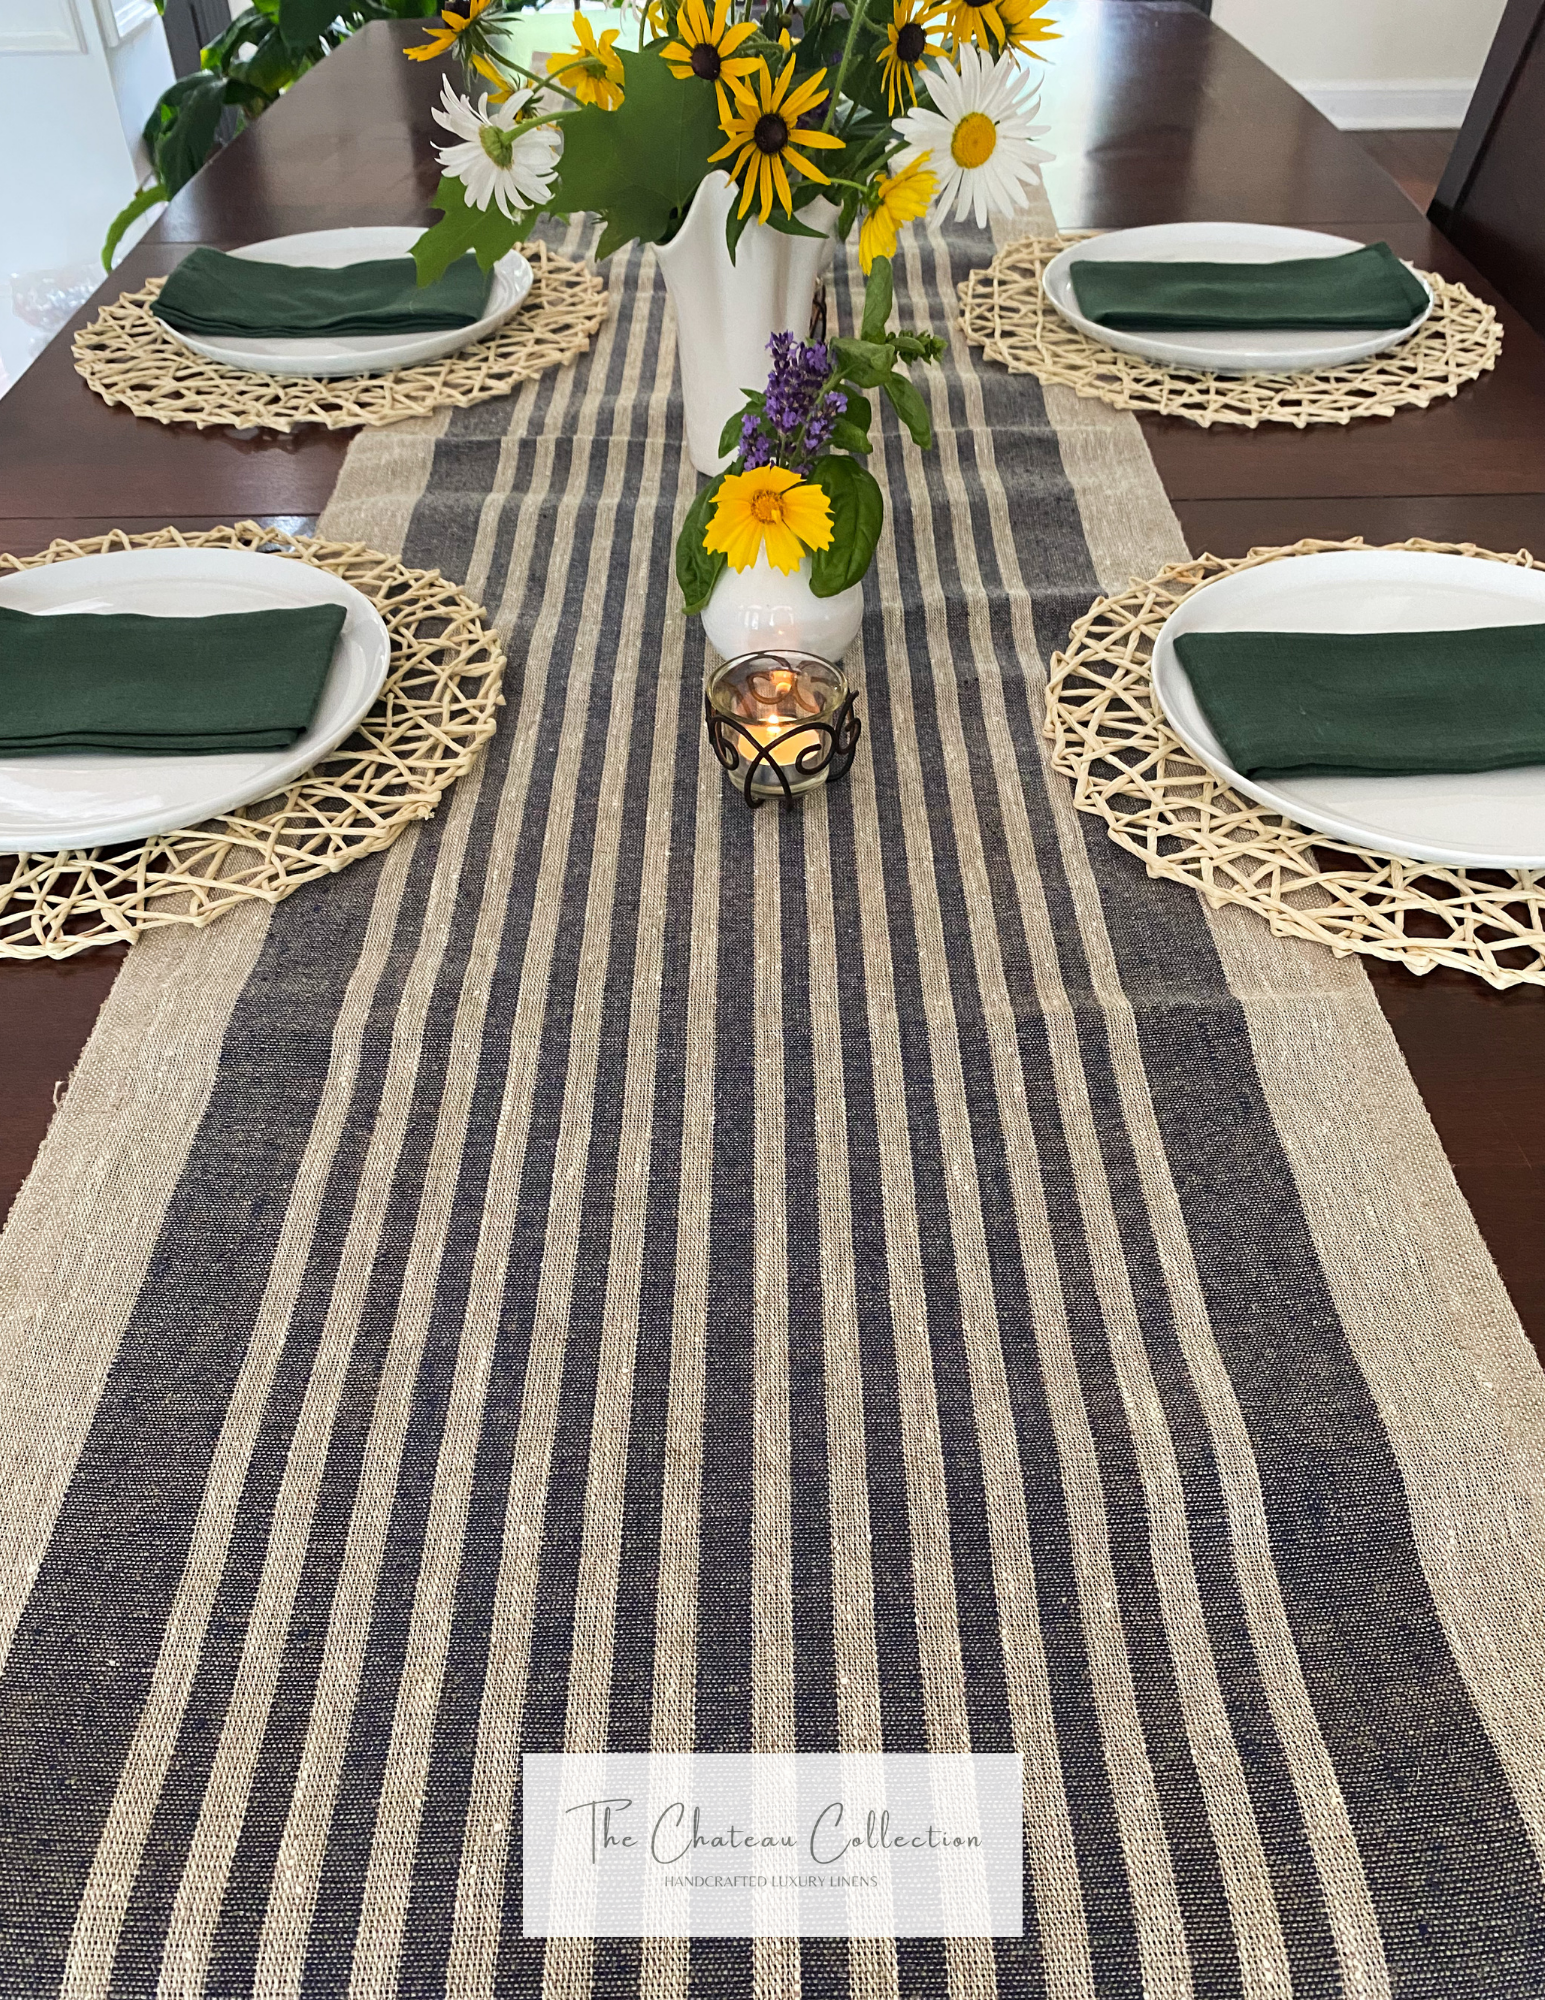 The Chateau Collection Navy Rustic Linen Table Runner